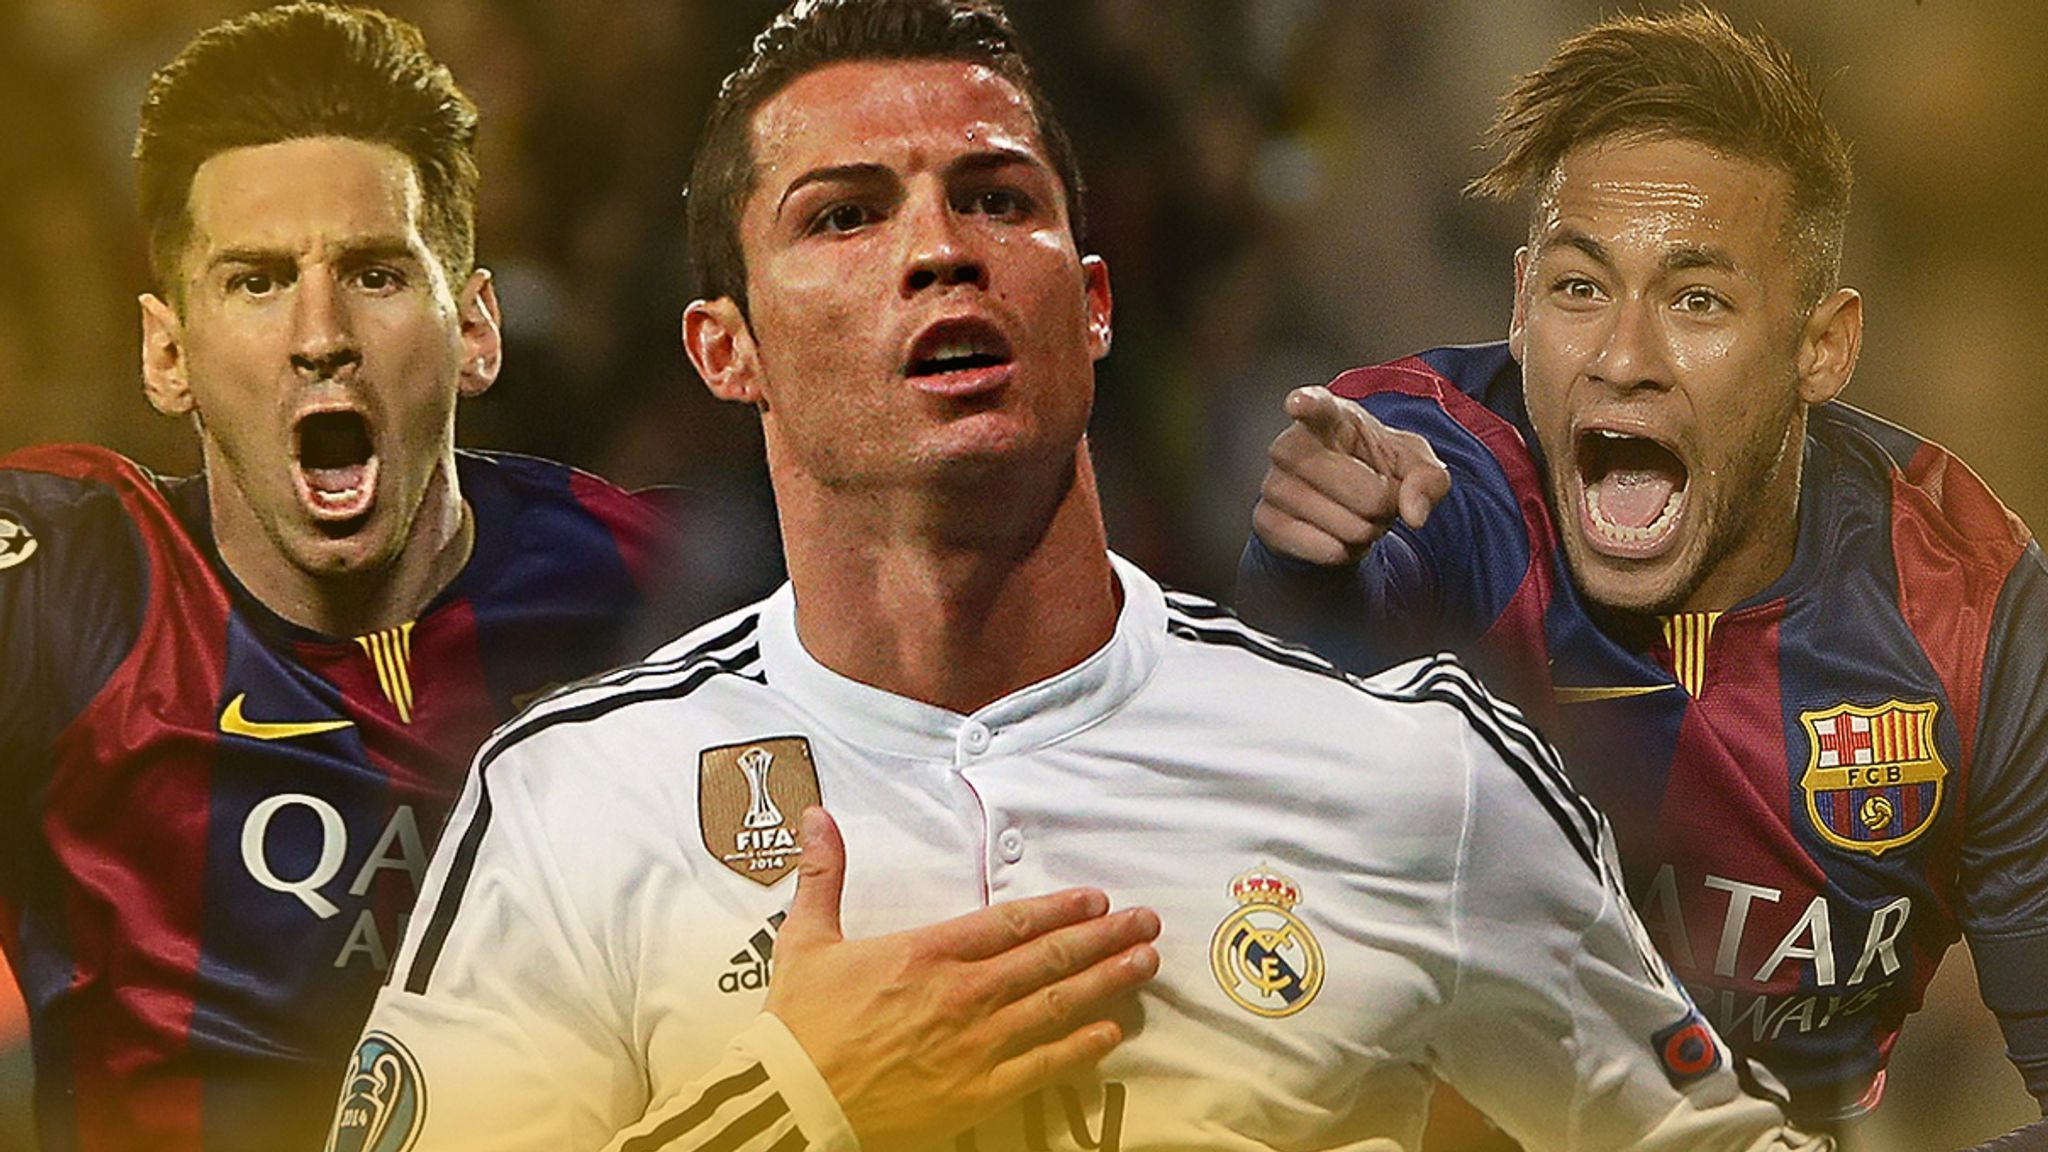 Cristiano Ronaldo, Lionel Messi and Neymar up for 2015 Ballon d'Or